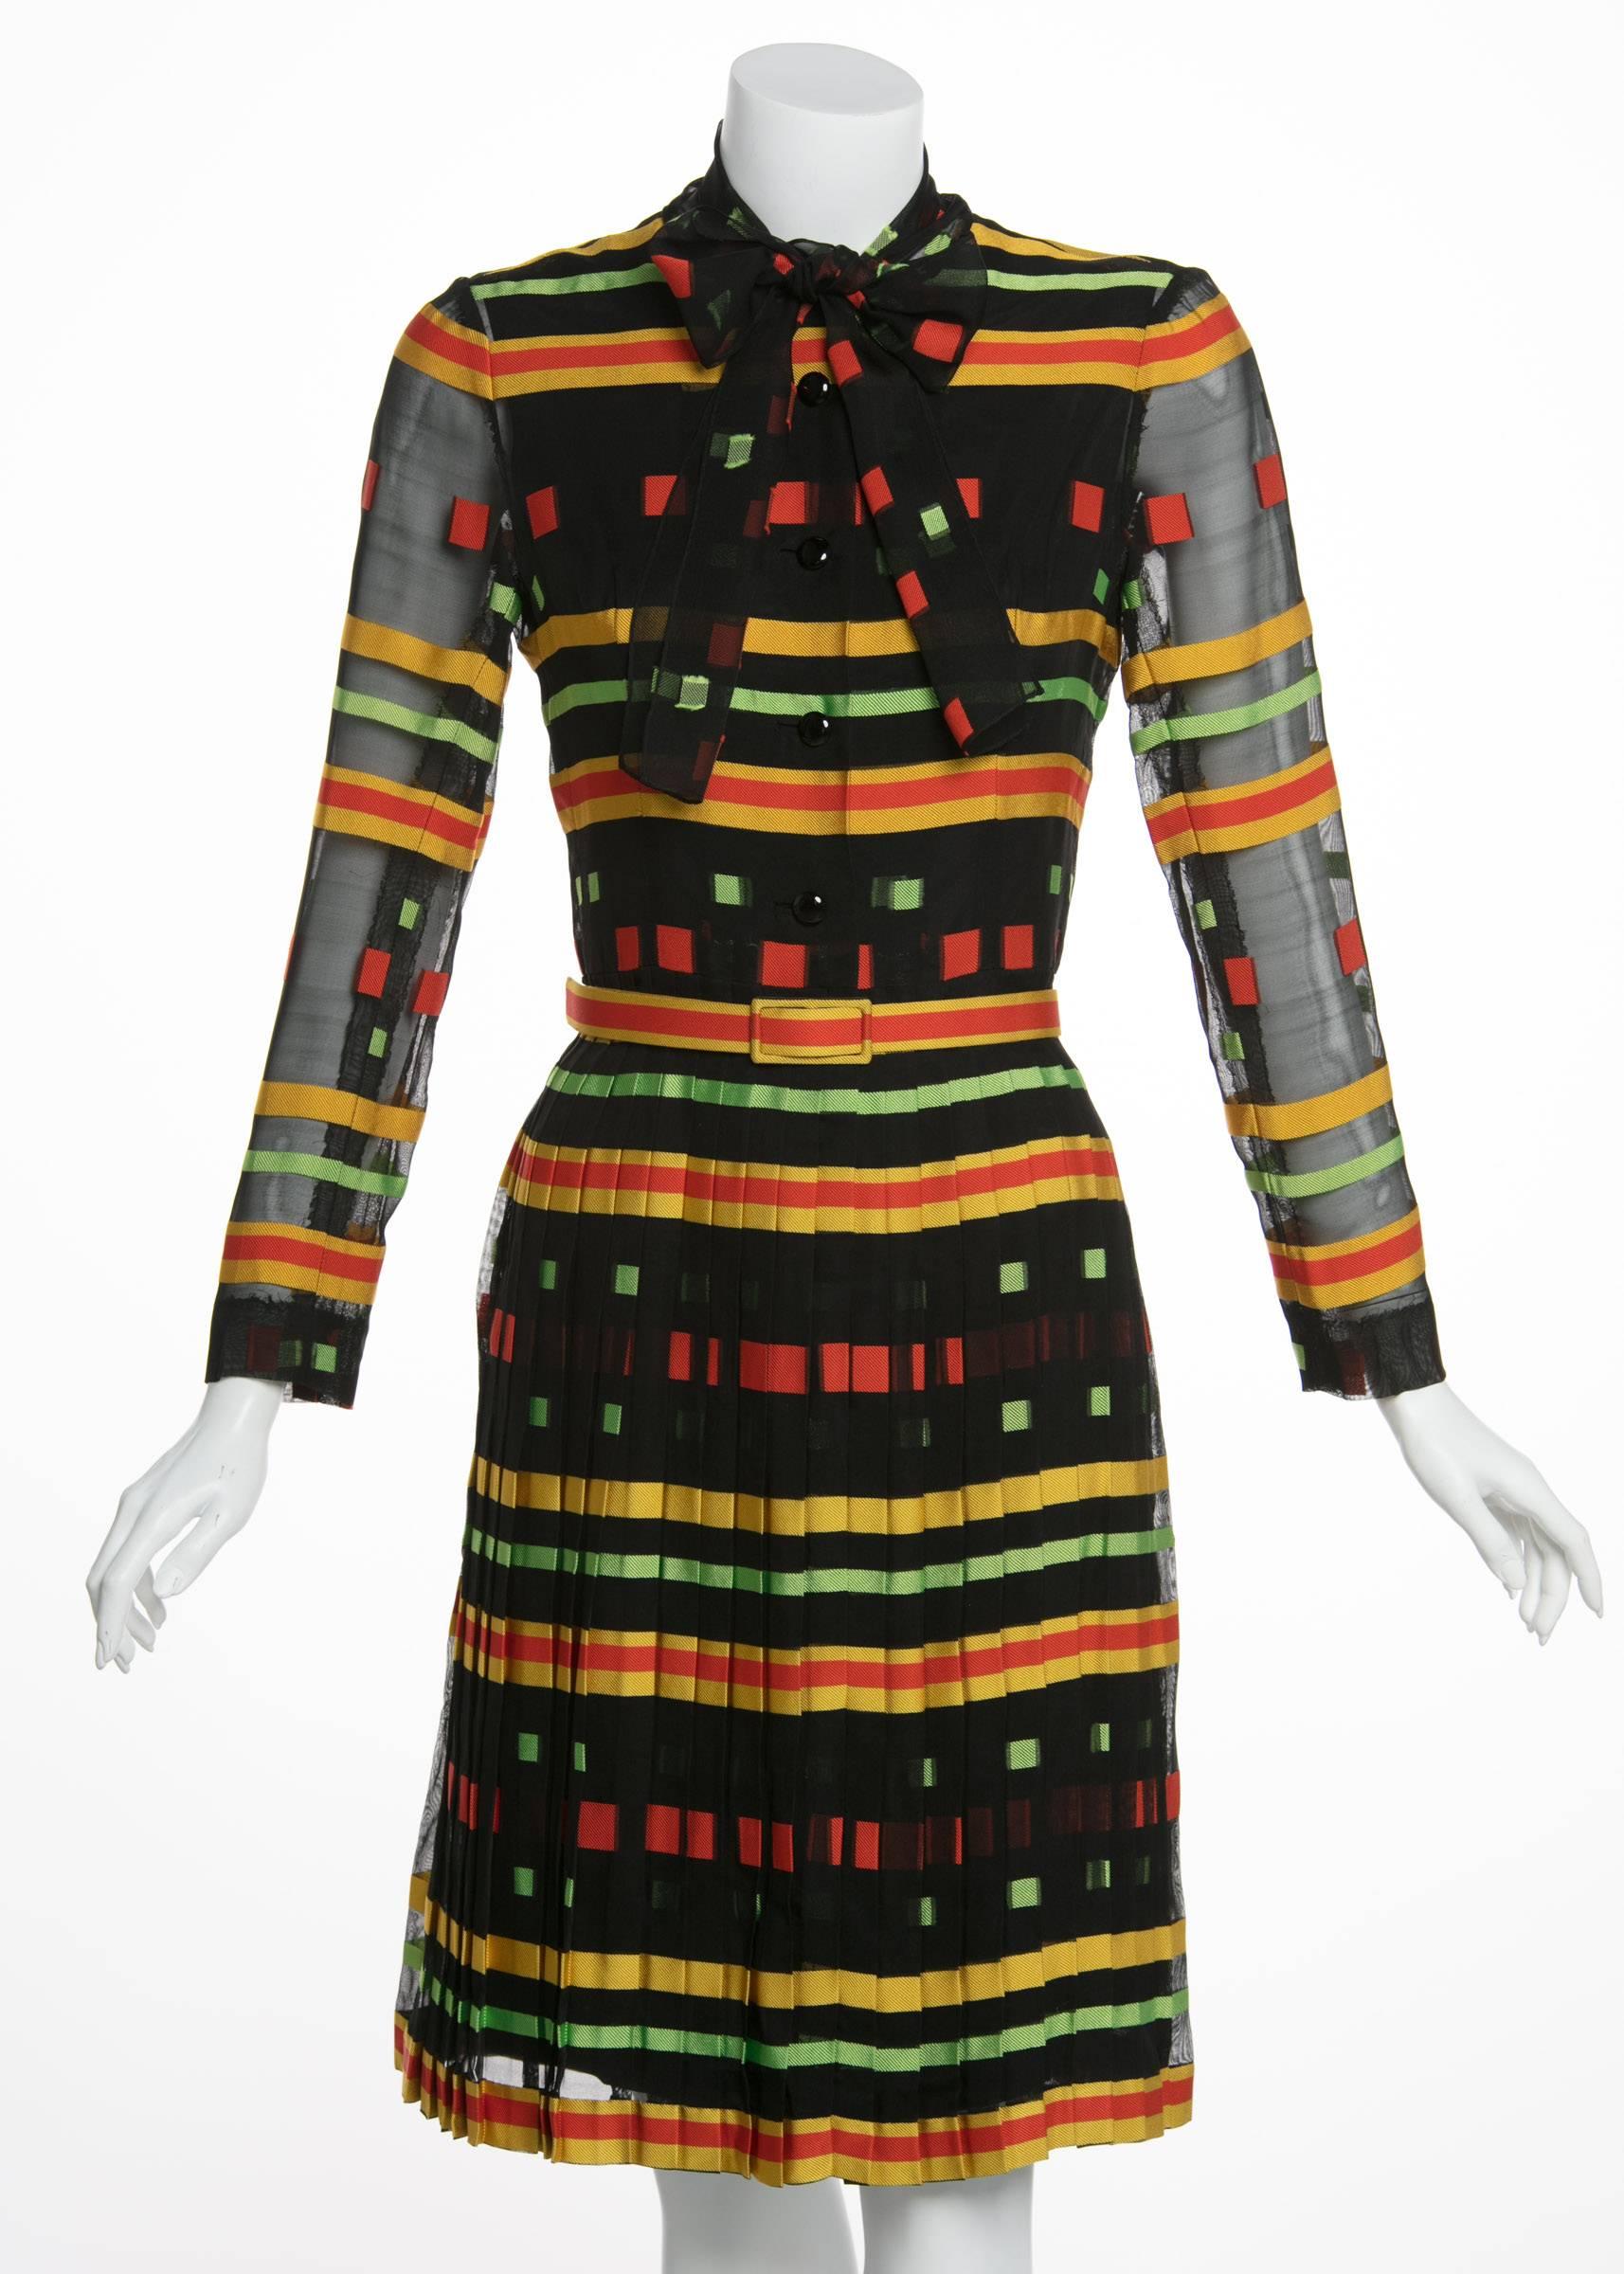 Givenchy Multicolored Striped Pleated  Silk Bow Belted Dress, 1970s  In Excellent Condition For Sale In Boca Raton, FL